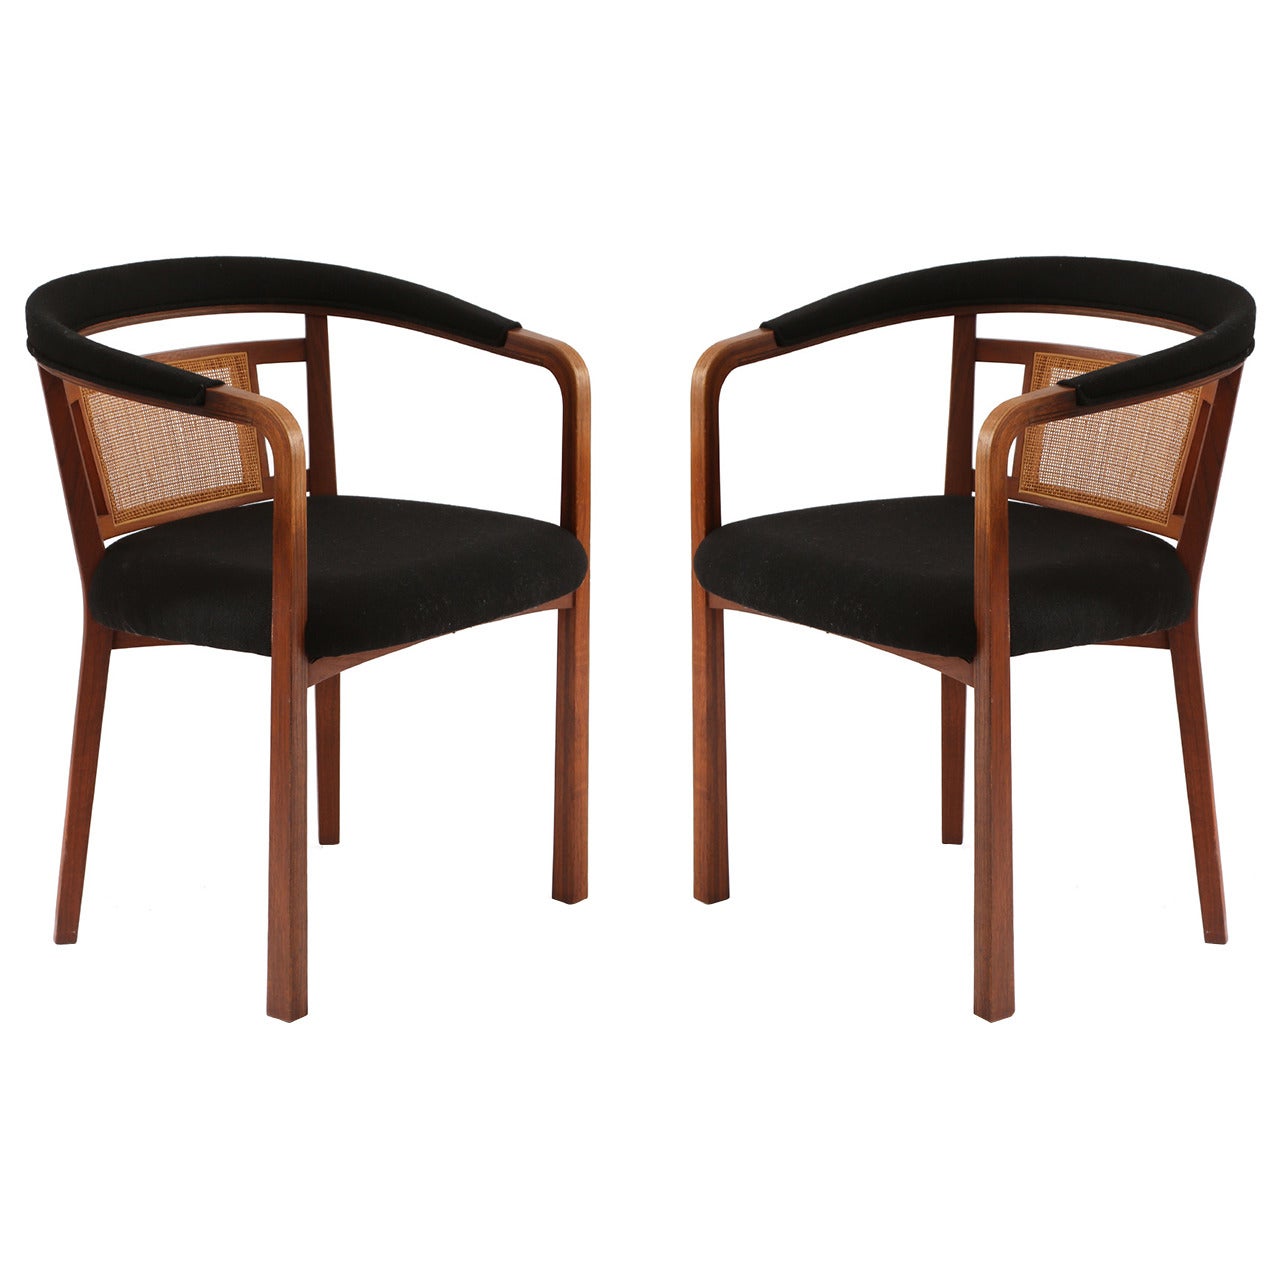 Pair of Edward Wormley for Dunbar Occasional Chairs